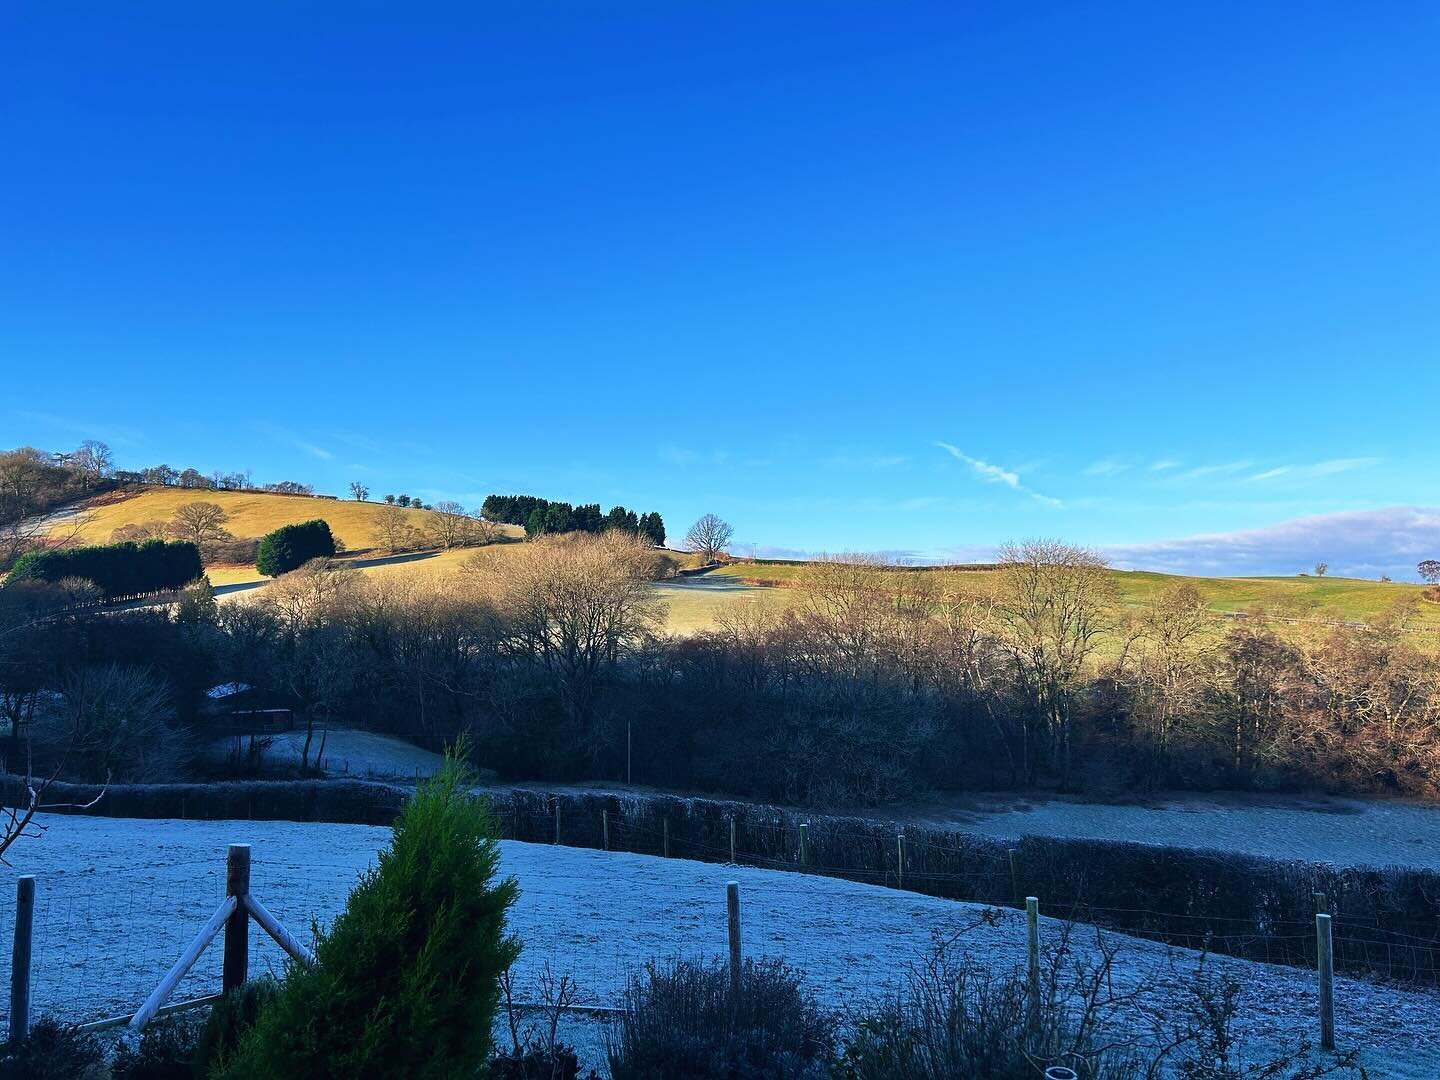 View from Pear Tree Lodge on a bright crispy morning 💕❄️